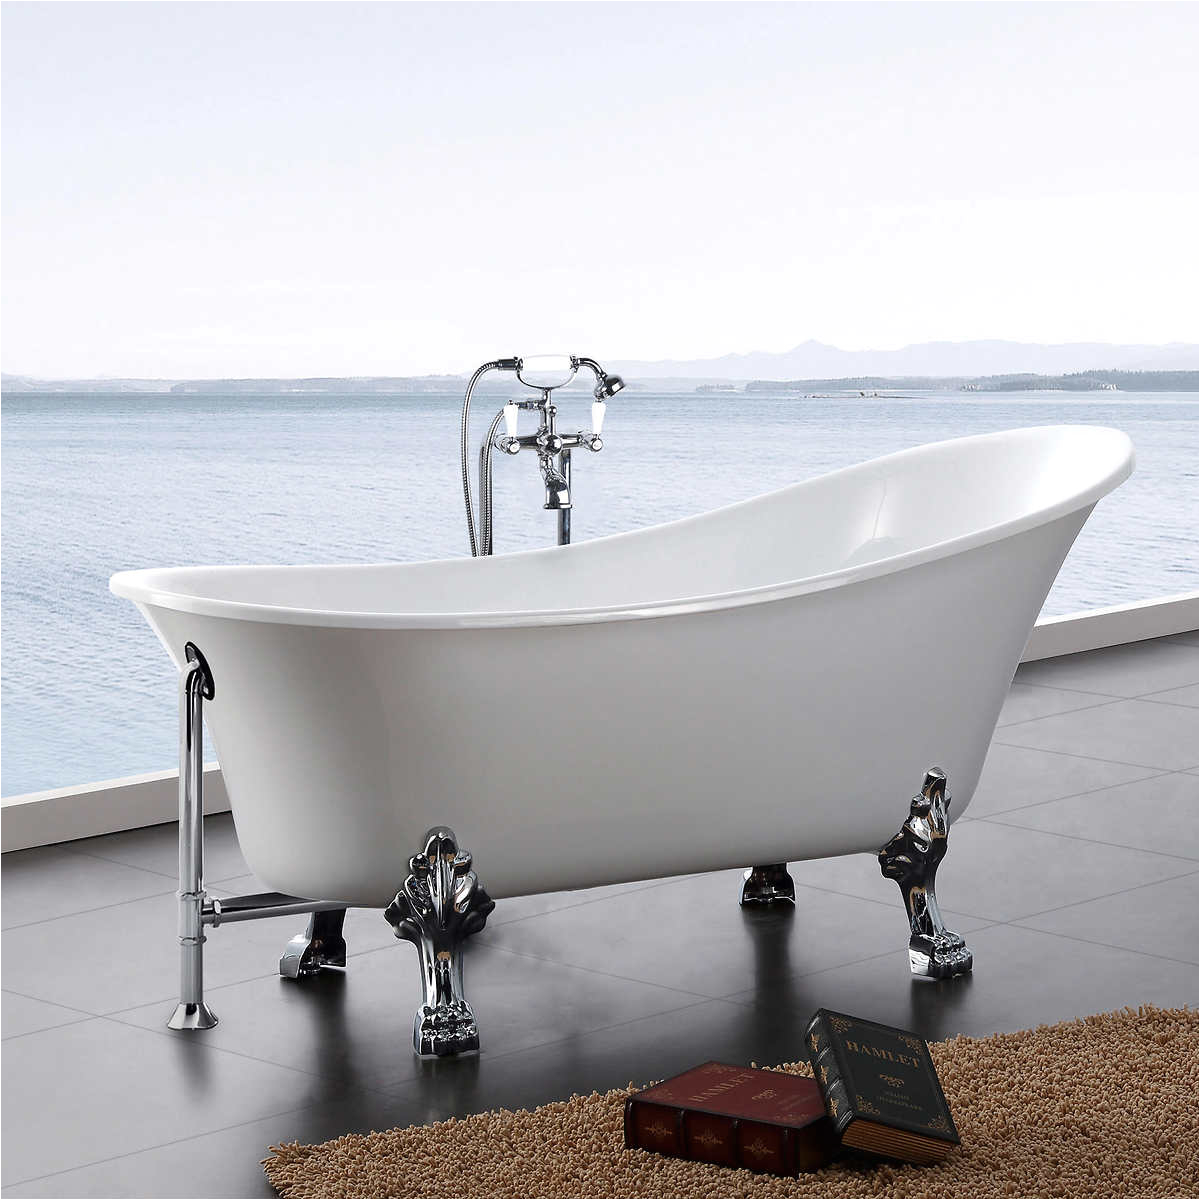 Bath with Claw Foot Tub Hibana 69" Acrylic Clawfoot Tub with Faucet and Handheld